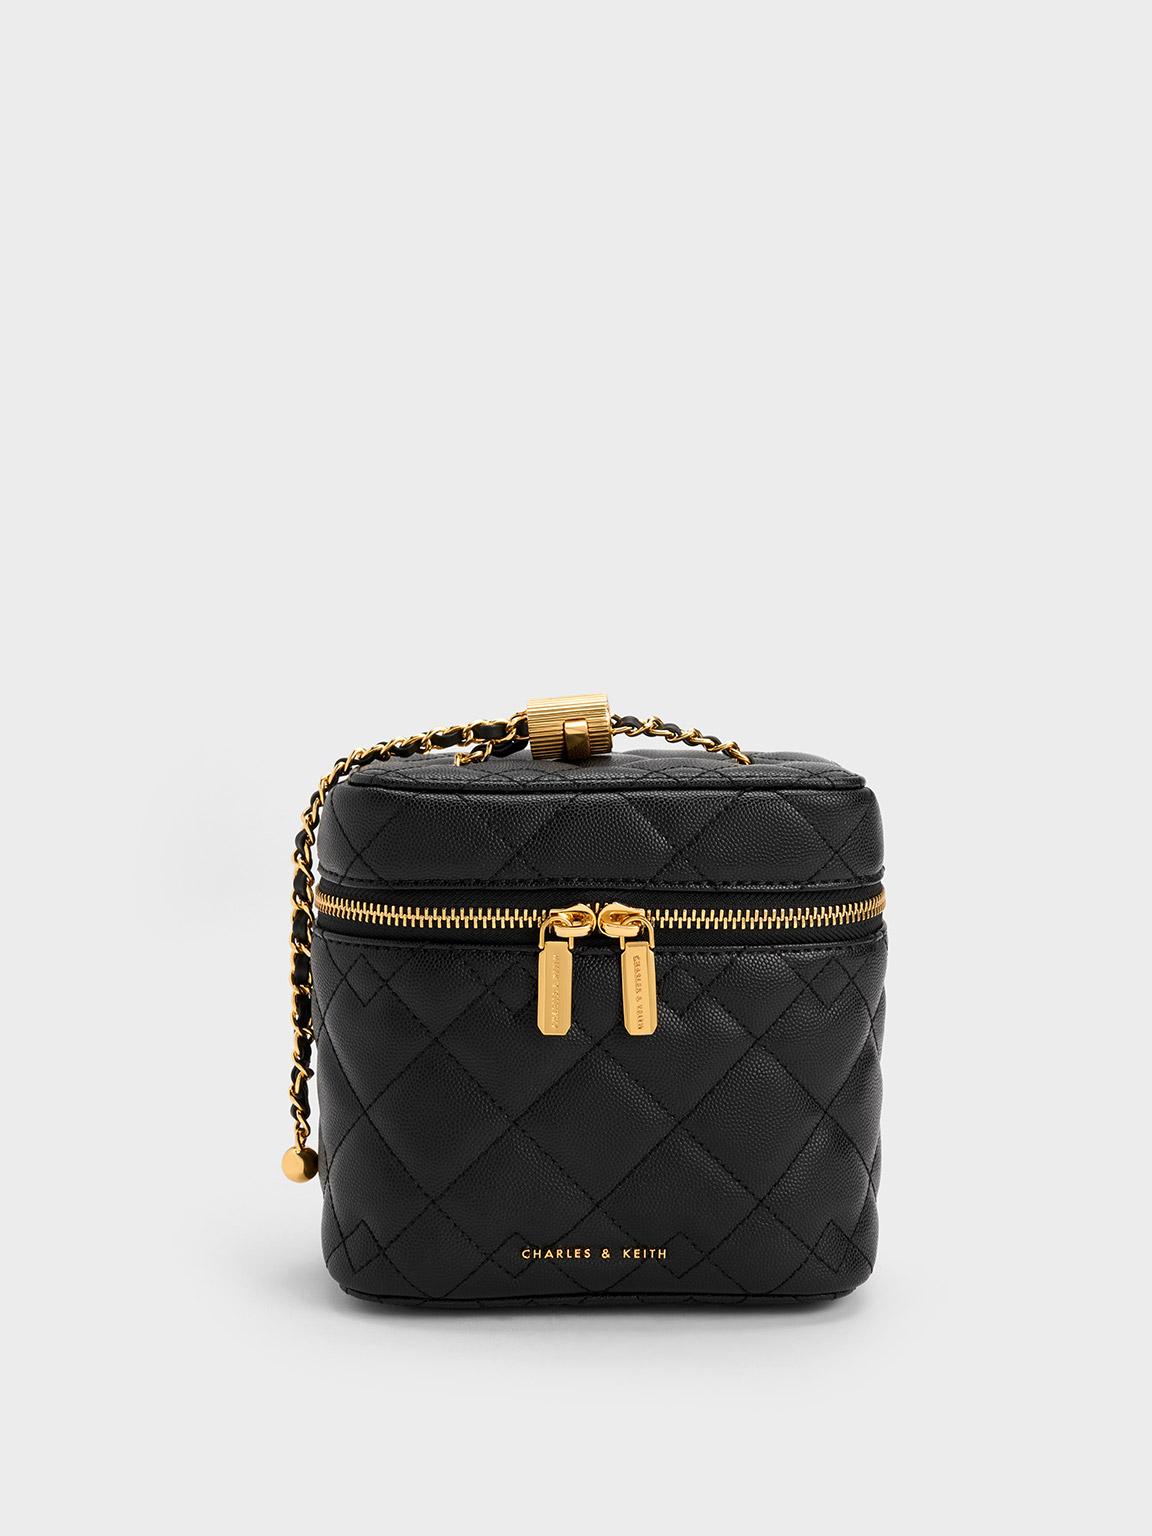 Charles & Keith Nezu Quilted Boxy Bag in Black